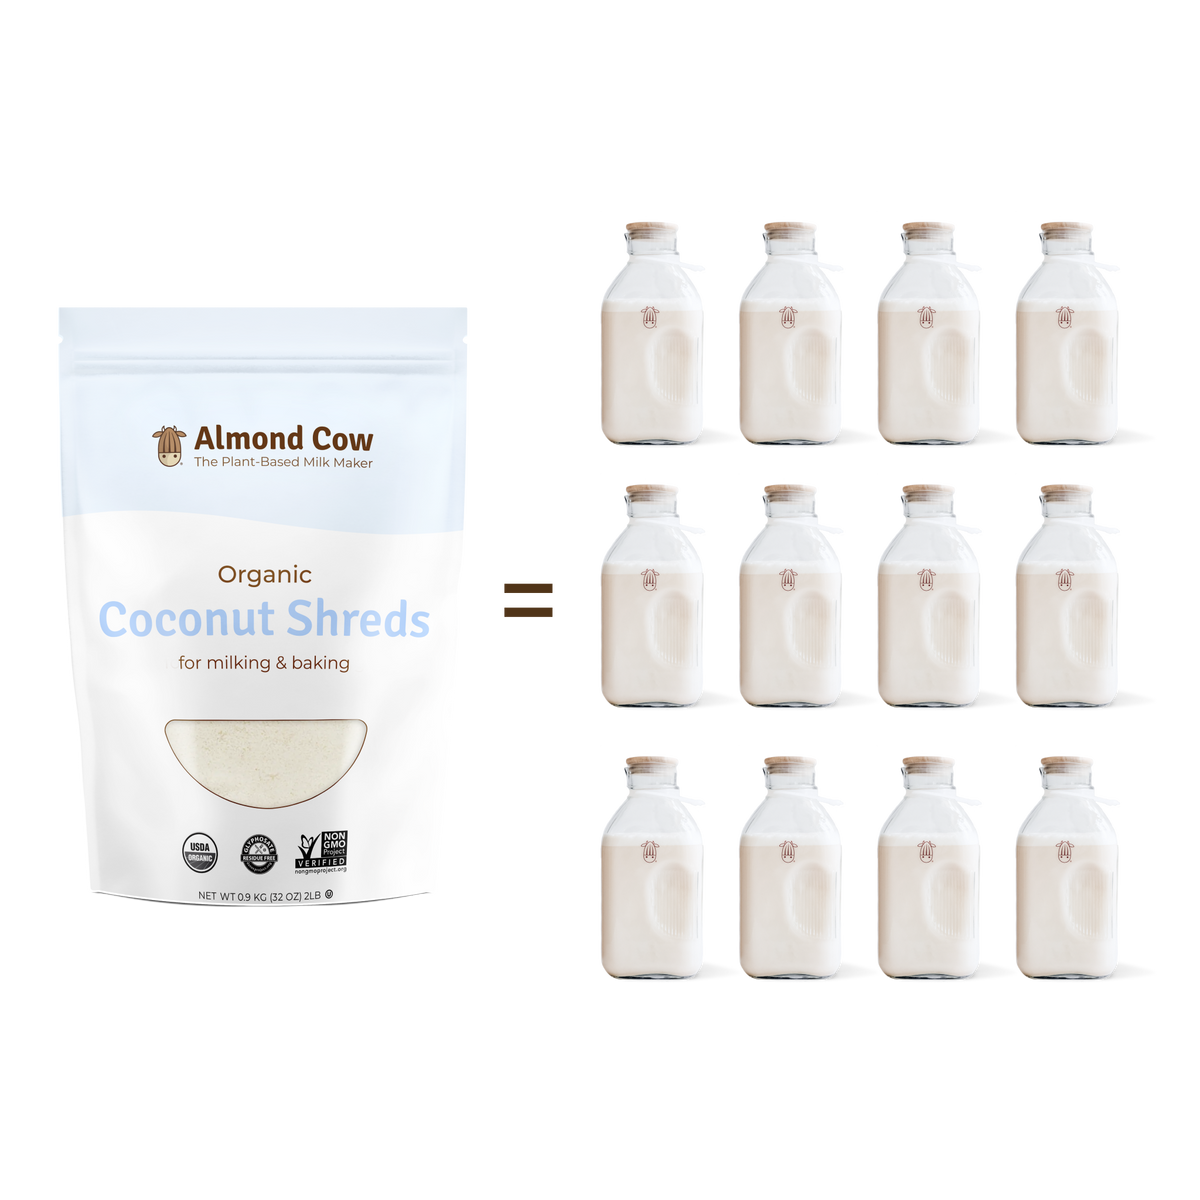 Organic coconut shreds - 2 lbs -one package makes 12 jugs of milk big cost savings image 3